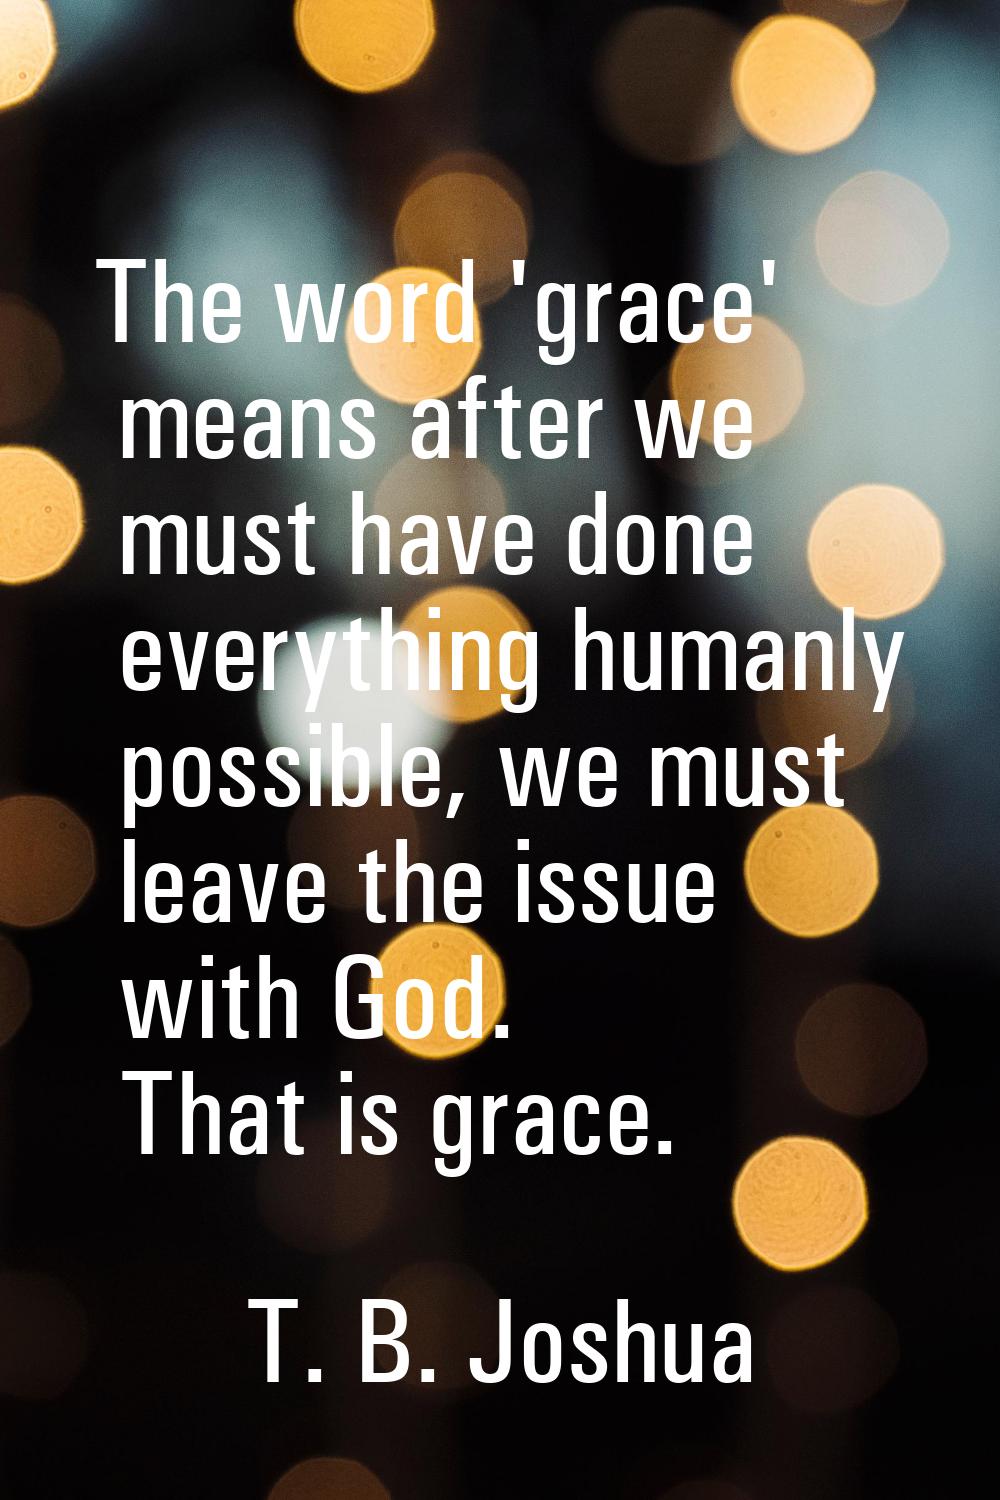 The word 'grace' means after we must have done everything humanly possible, we must leave the issue